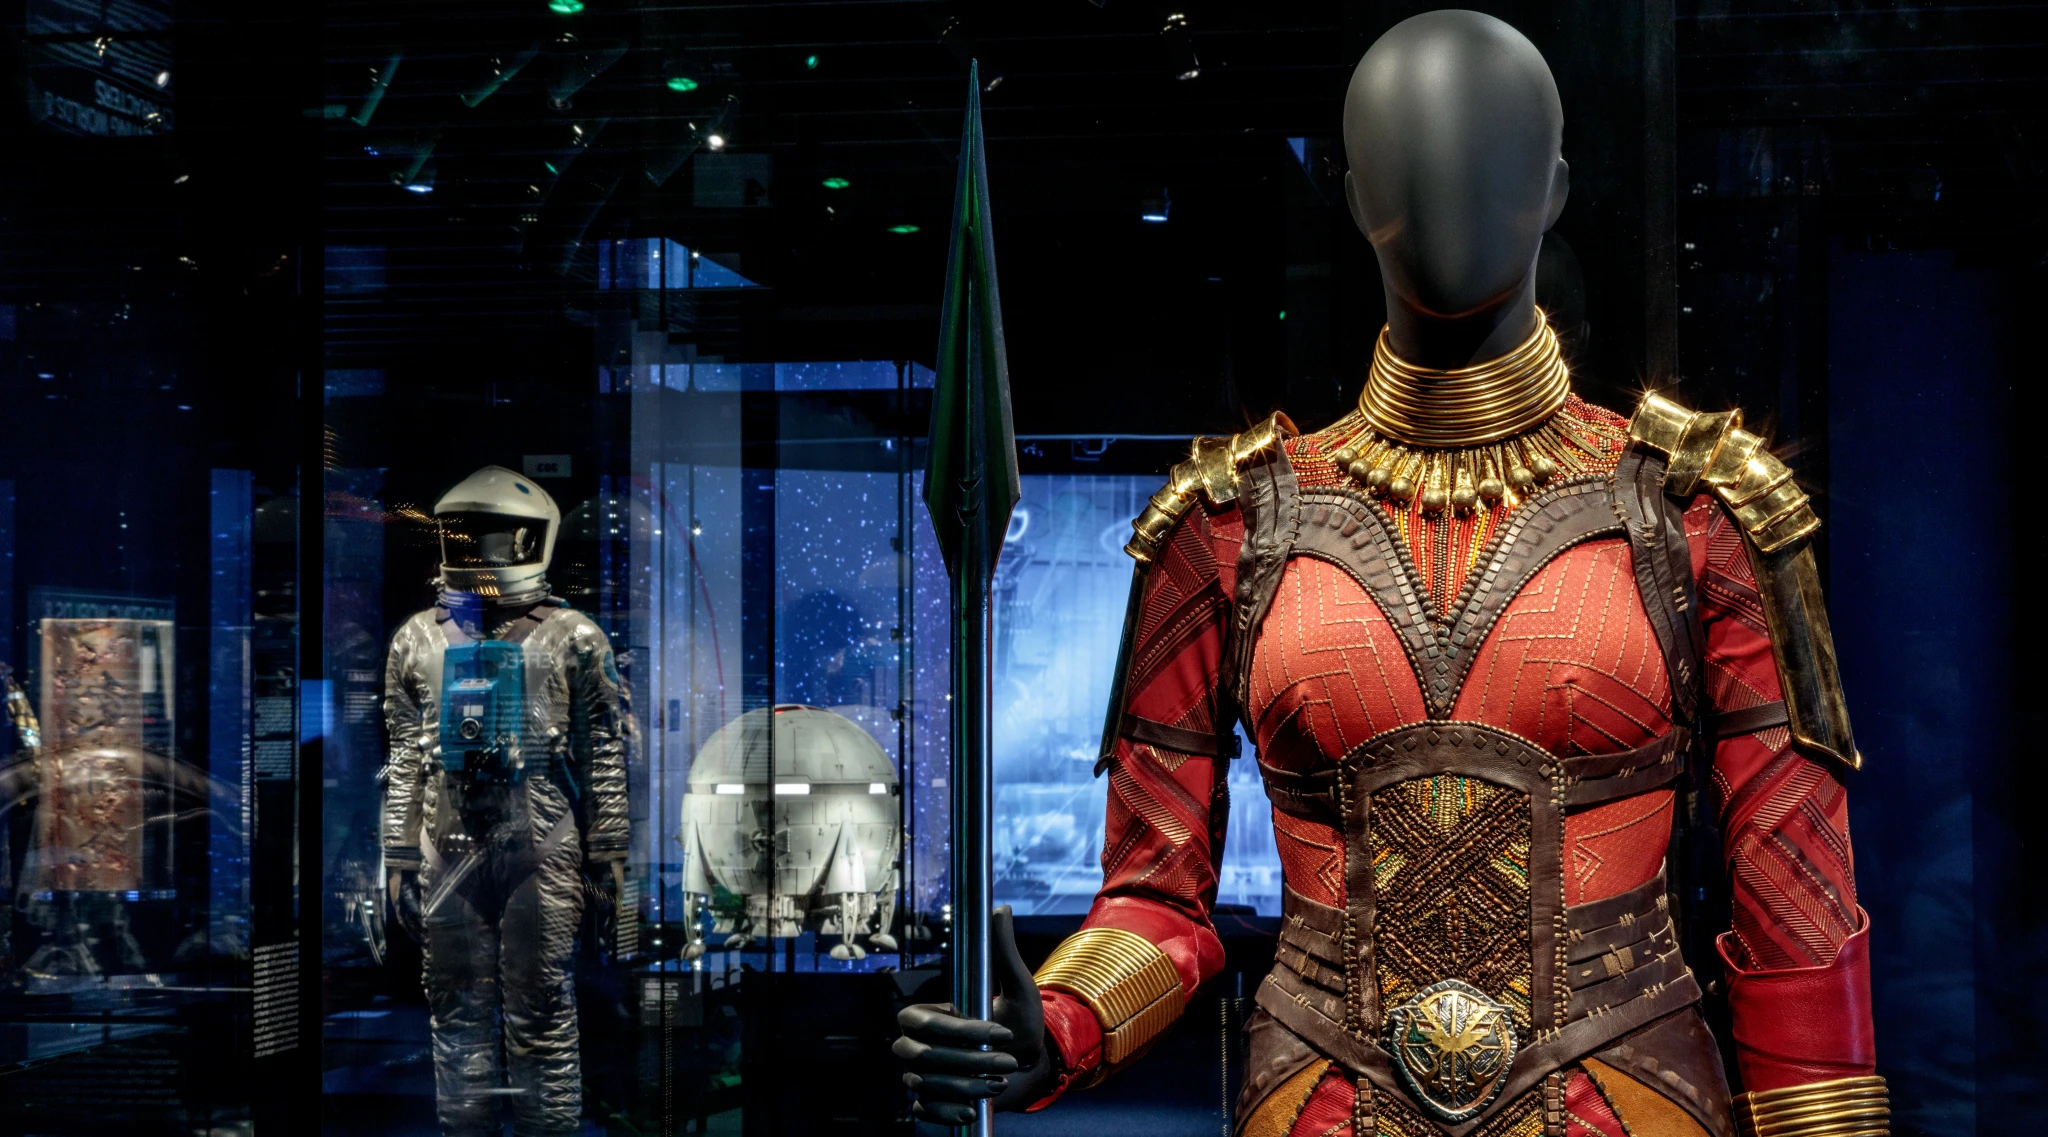 If You Love Movies, You'll Love These 12 Things At The Academy Museum